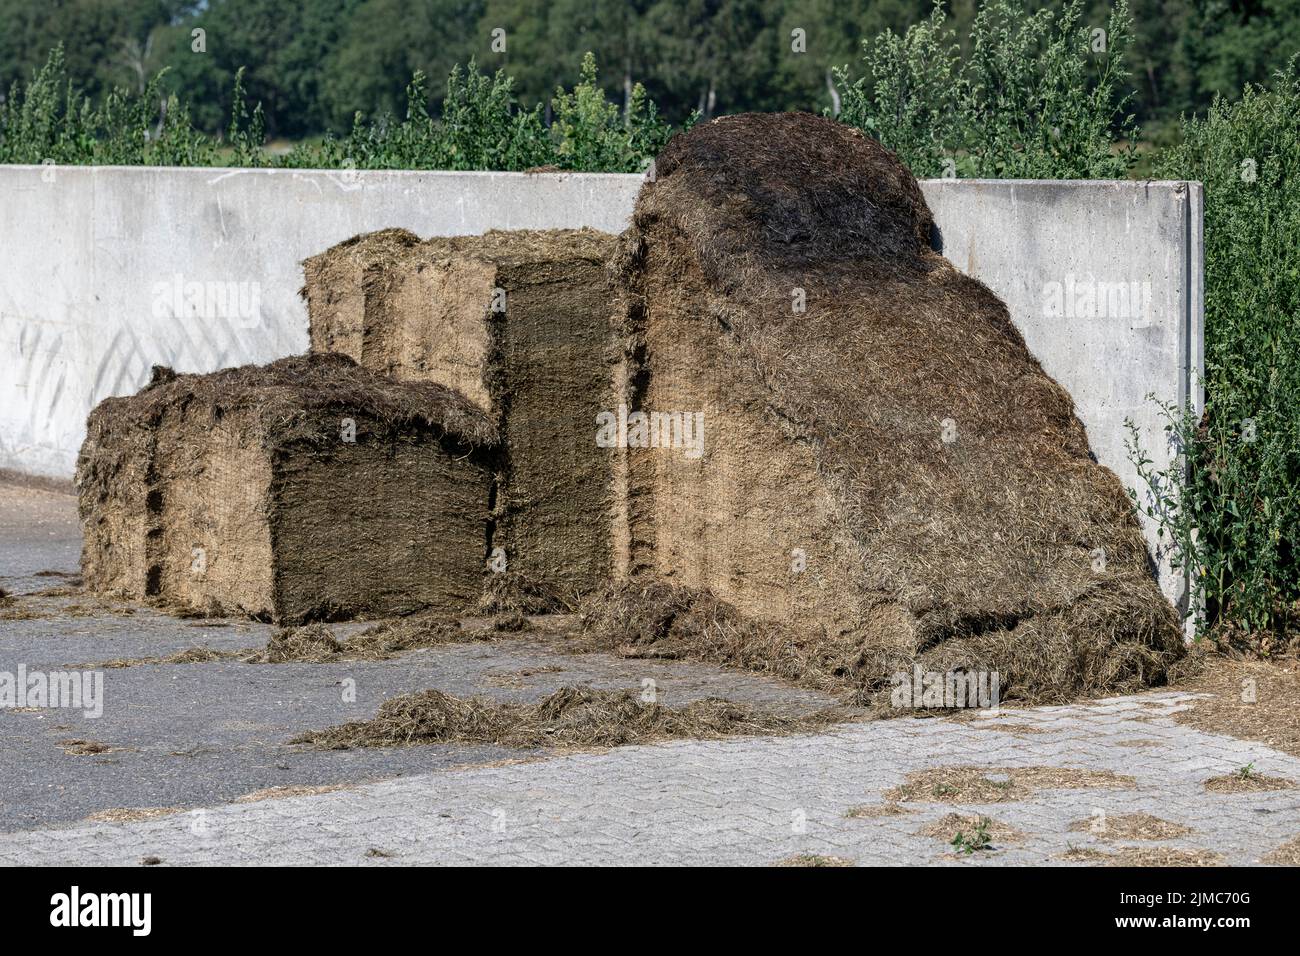 Silage in a concrete pit Stock Photo